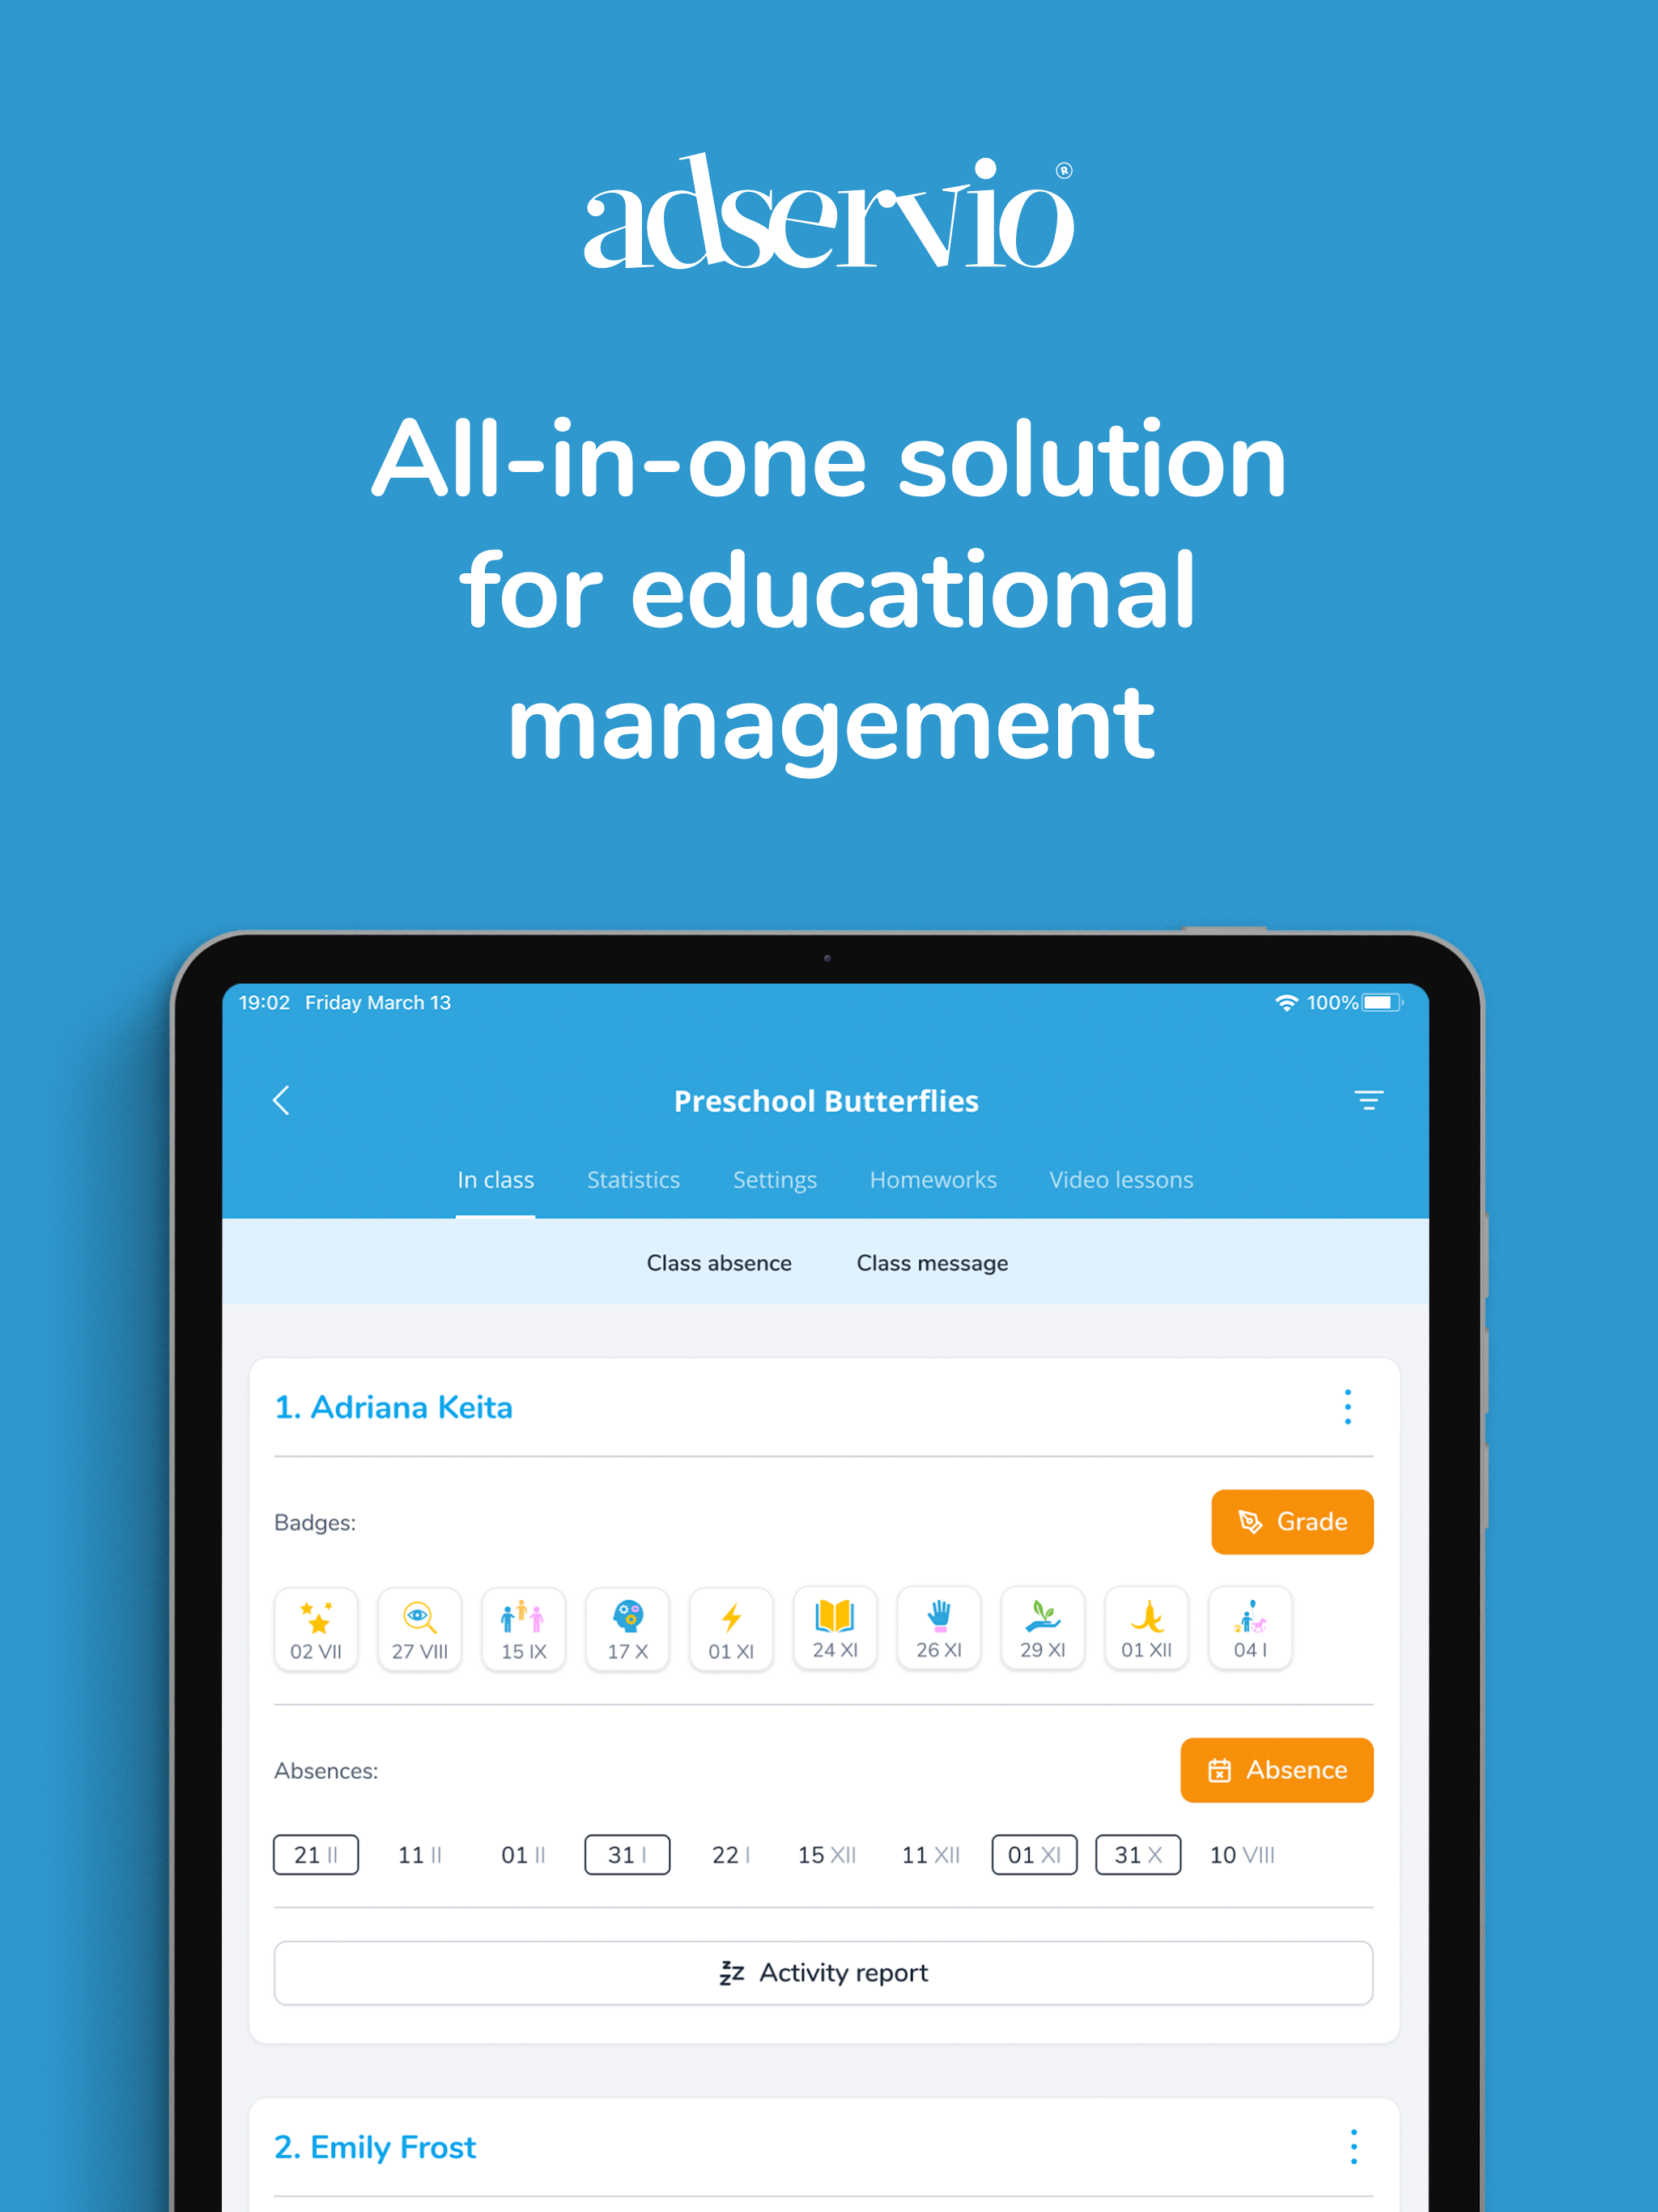 Teachers quickly enter grades, absences or ratings. Parents receive notifications in real time with the school situation.